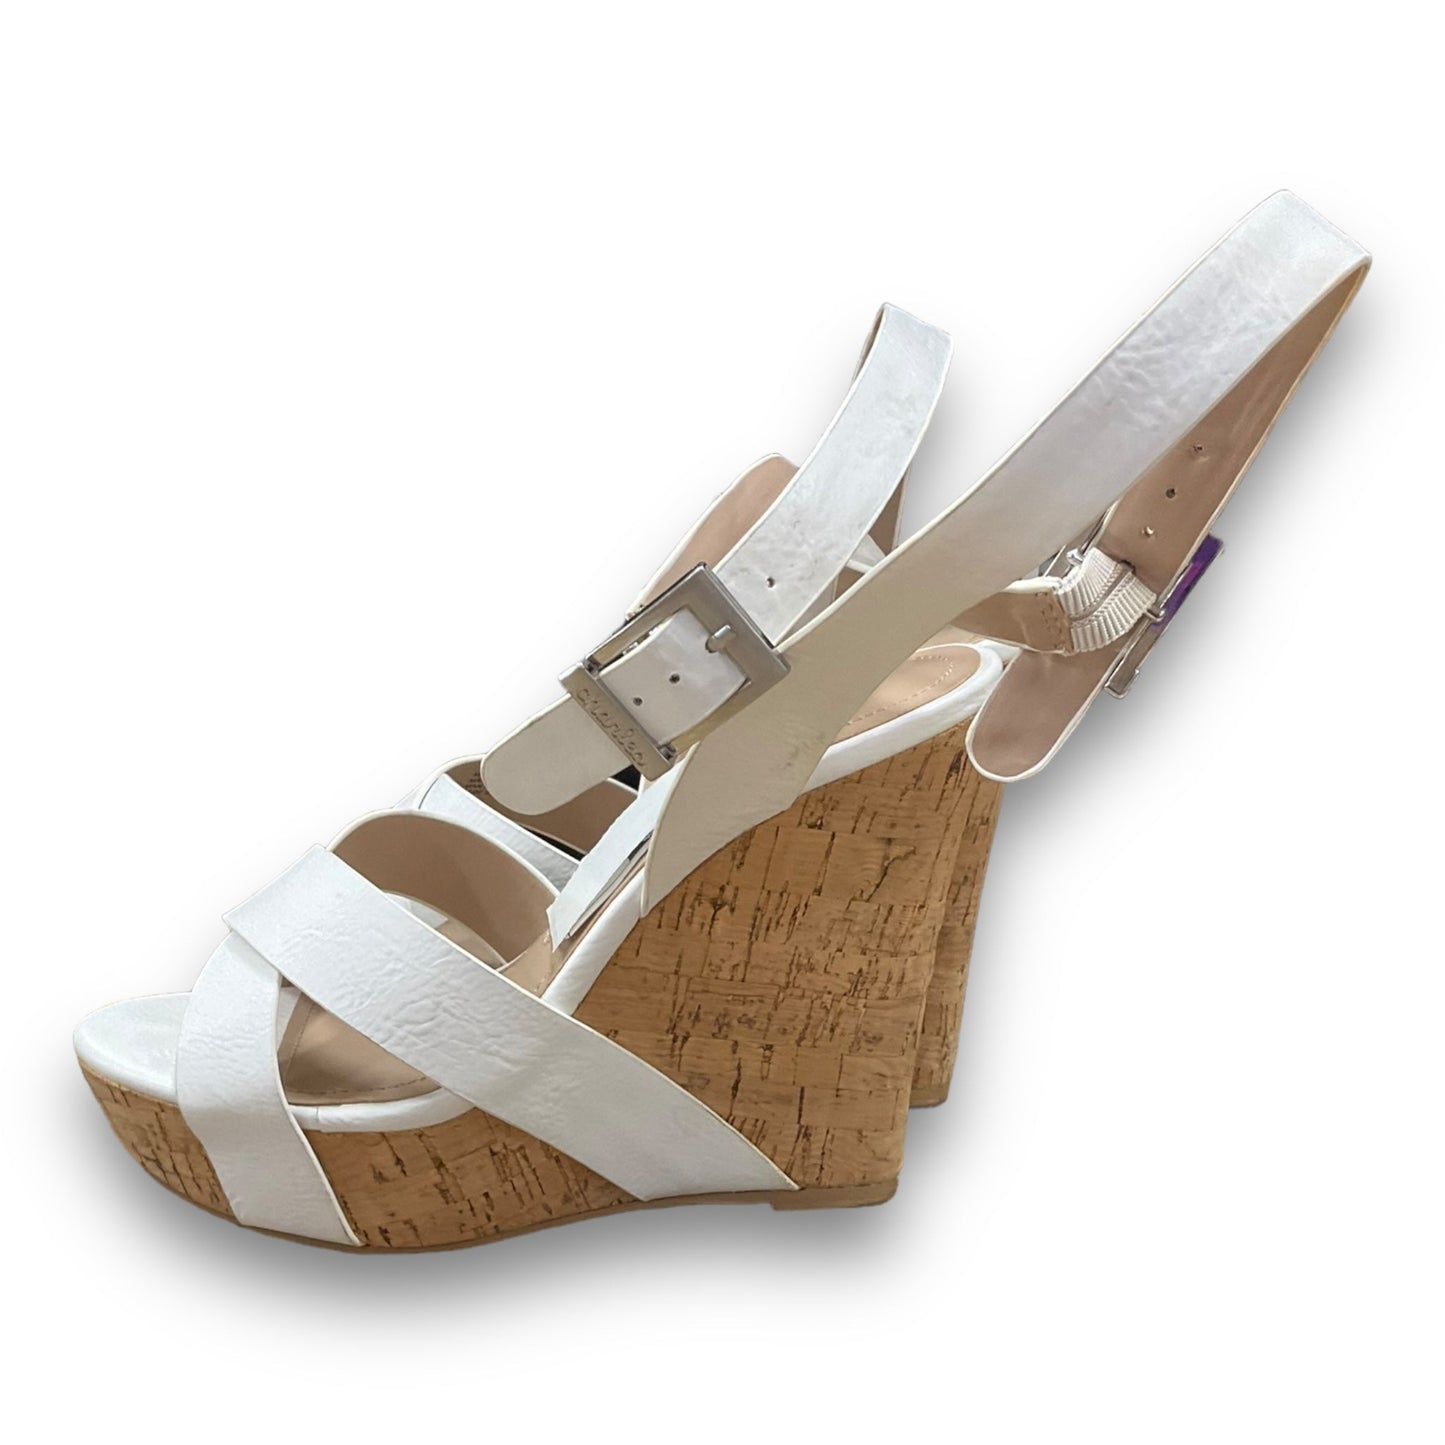 Sandals Heels Wedge By Charles By Charles David  Size: 5.5